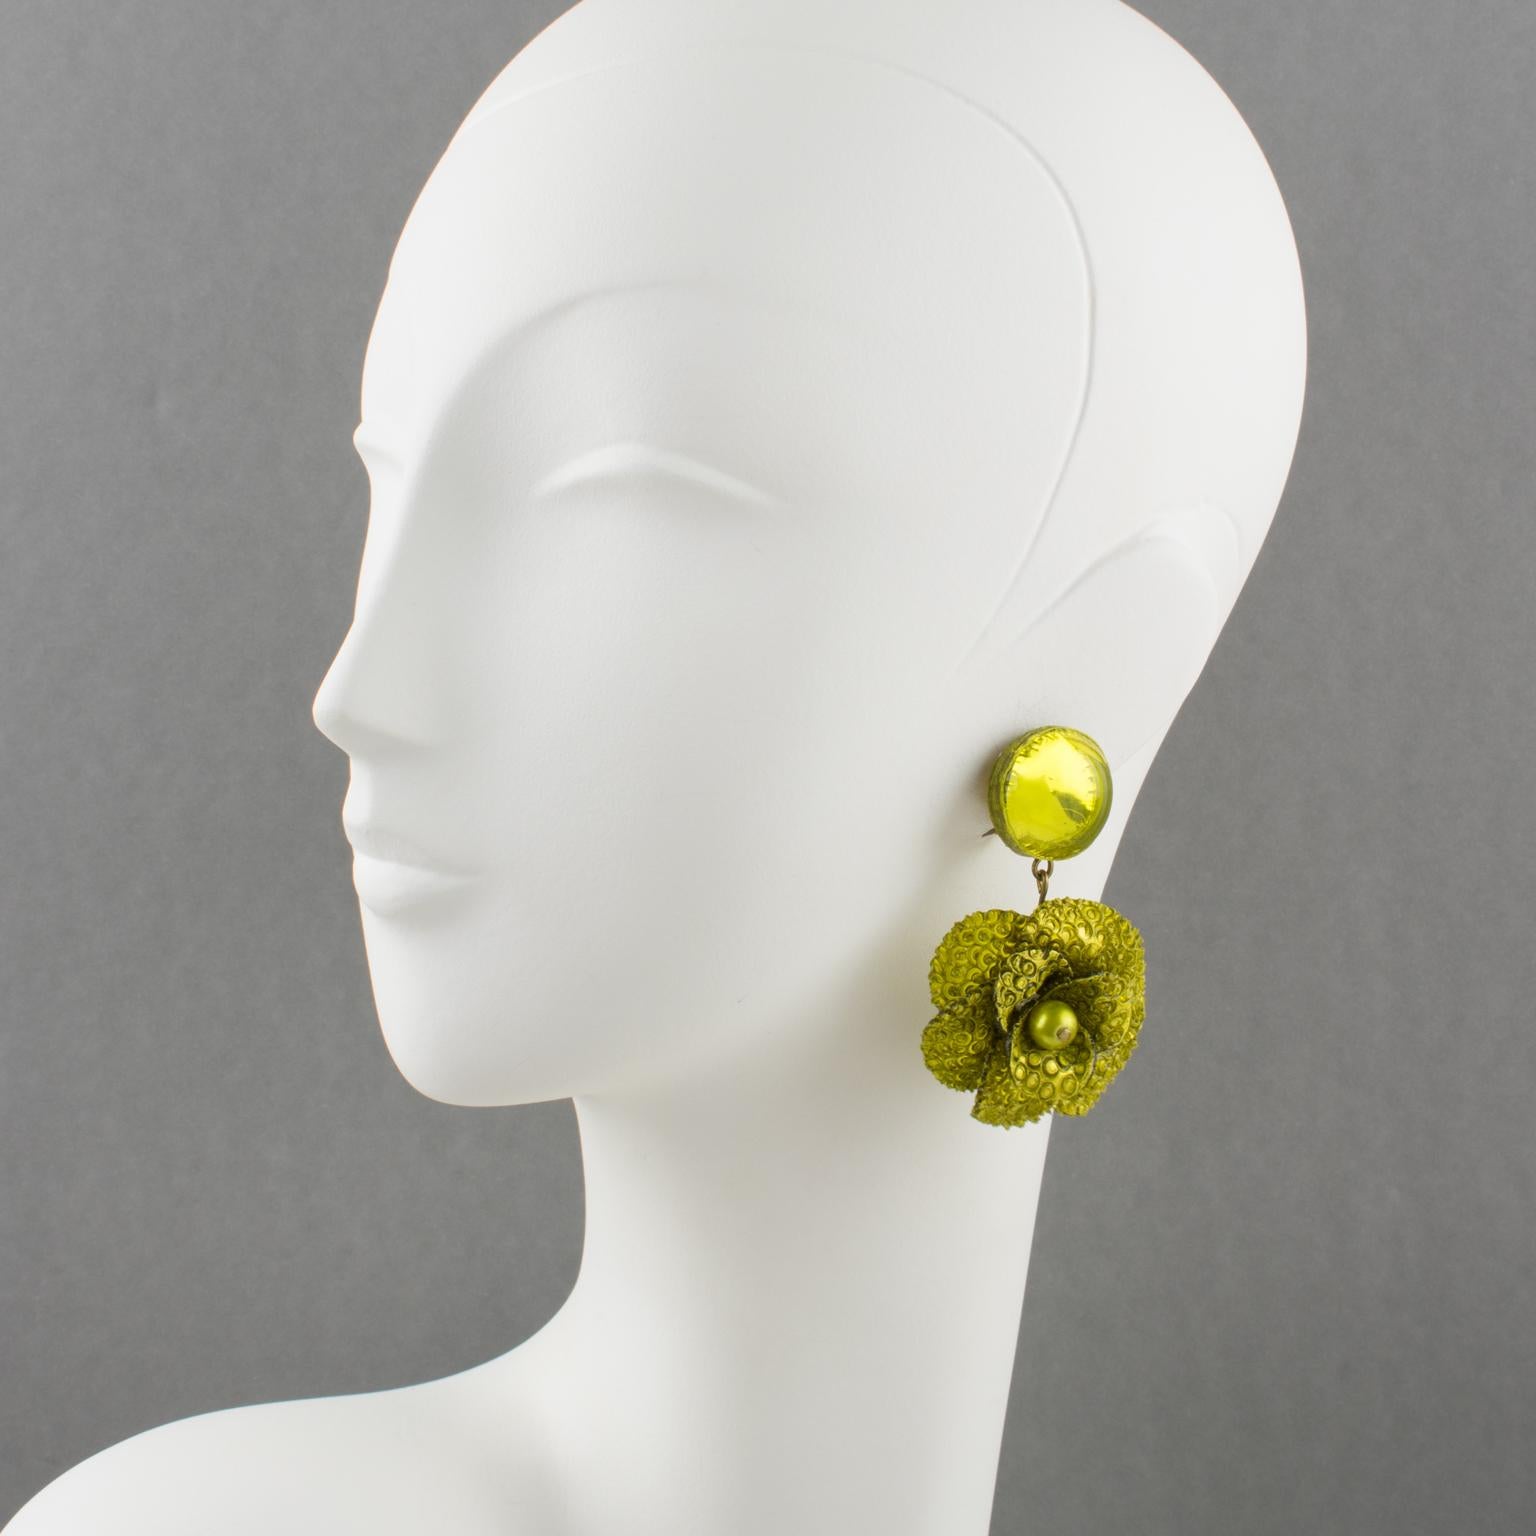 Charming dimensional dangling clip-on earrings designed by Cilea Paris for French Jewelry designer Francoise Montague. Floral-inspired hand-made artisanal resin earrings featuring poppy flowers with textured patterns built together to form a